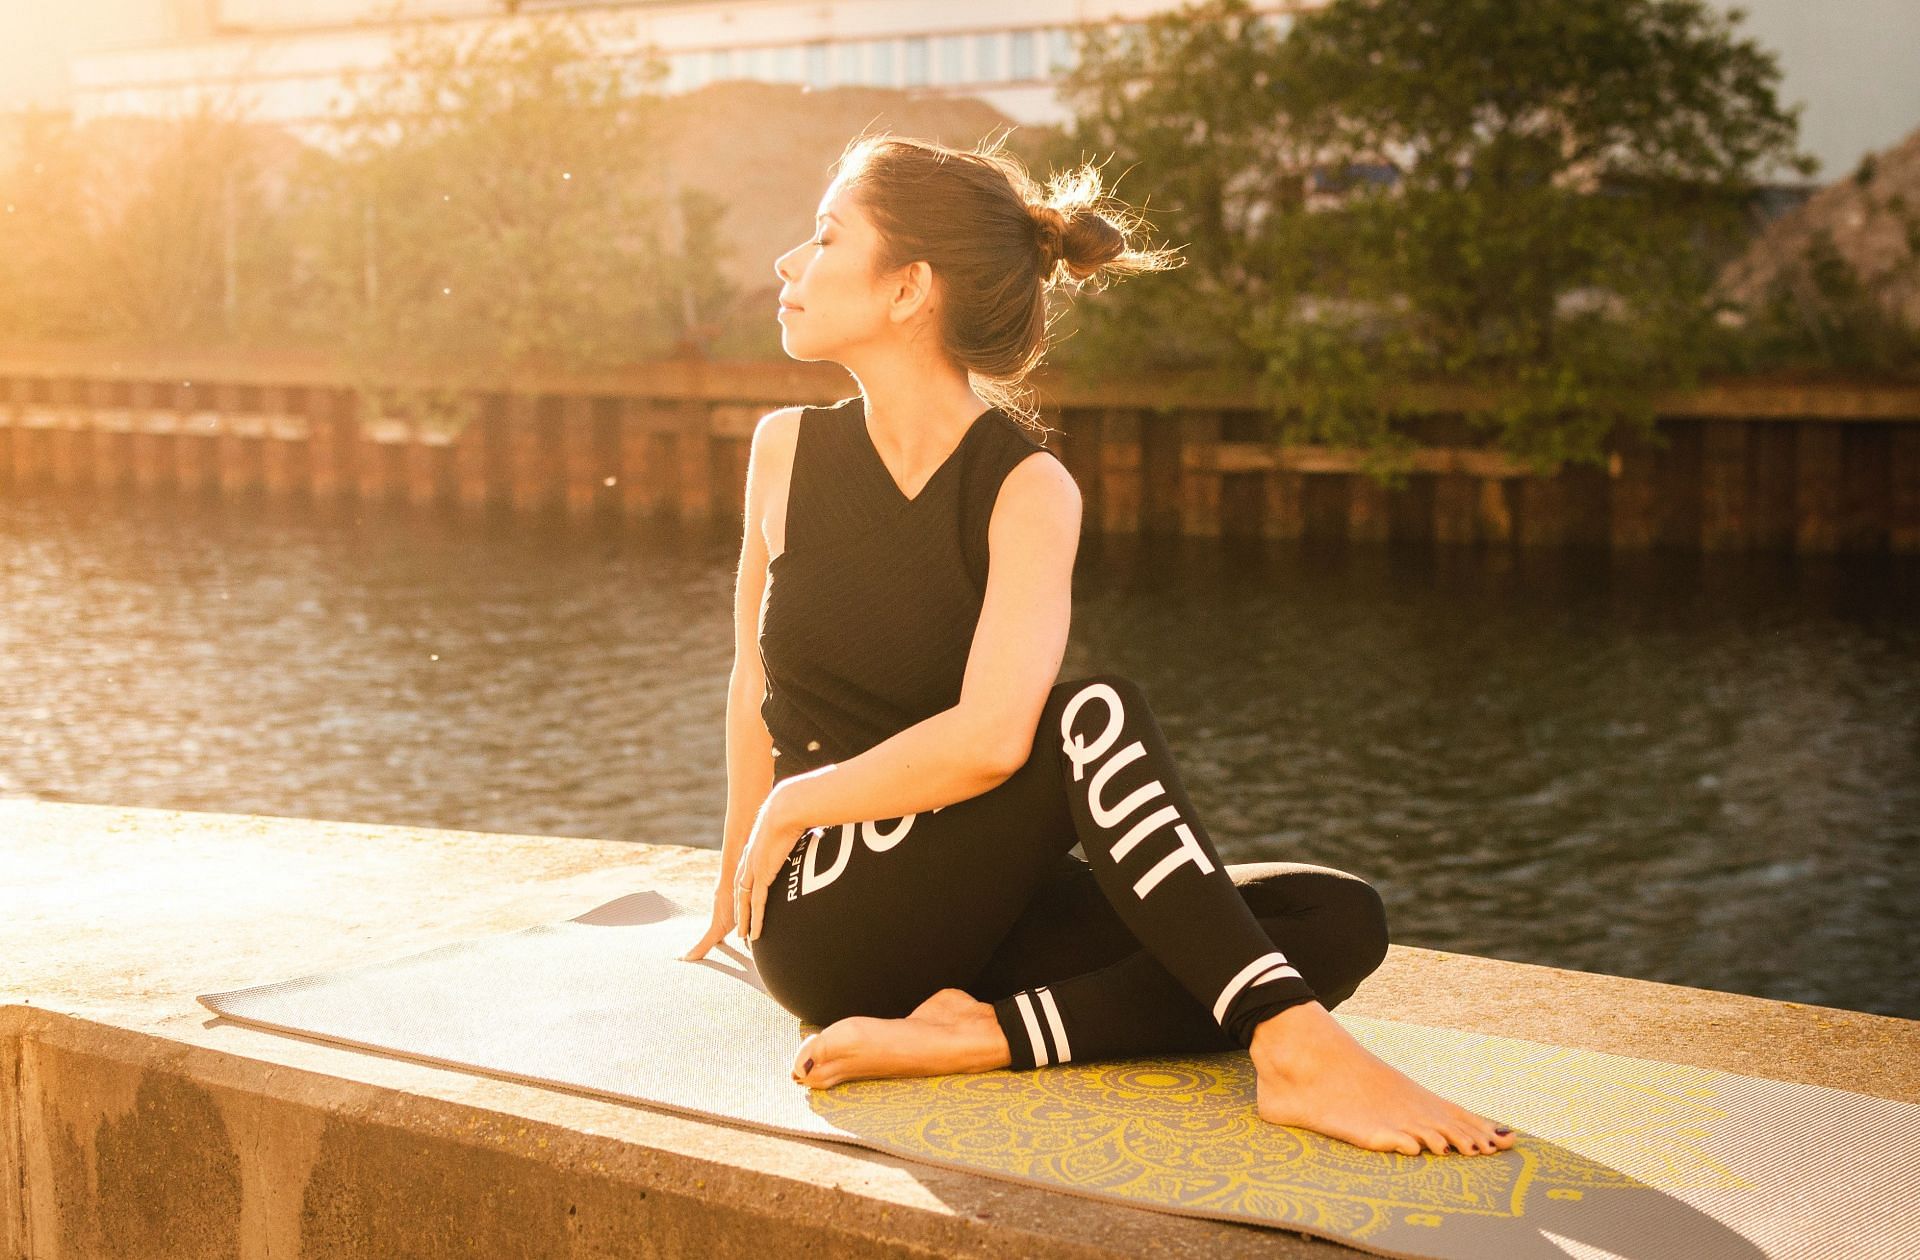 Revitalise Your Digestion with Yoga: 9 Poses to Promote Digestive Wellness